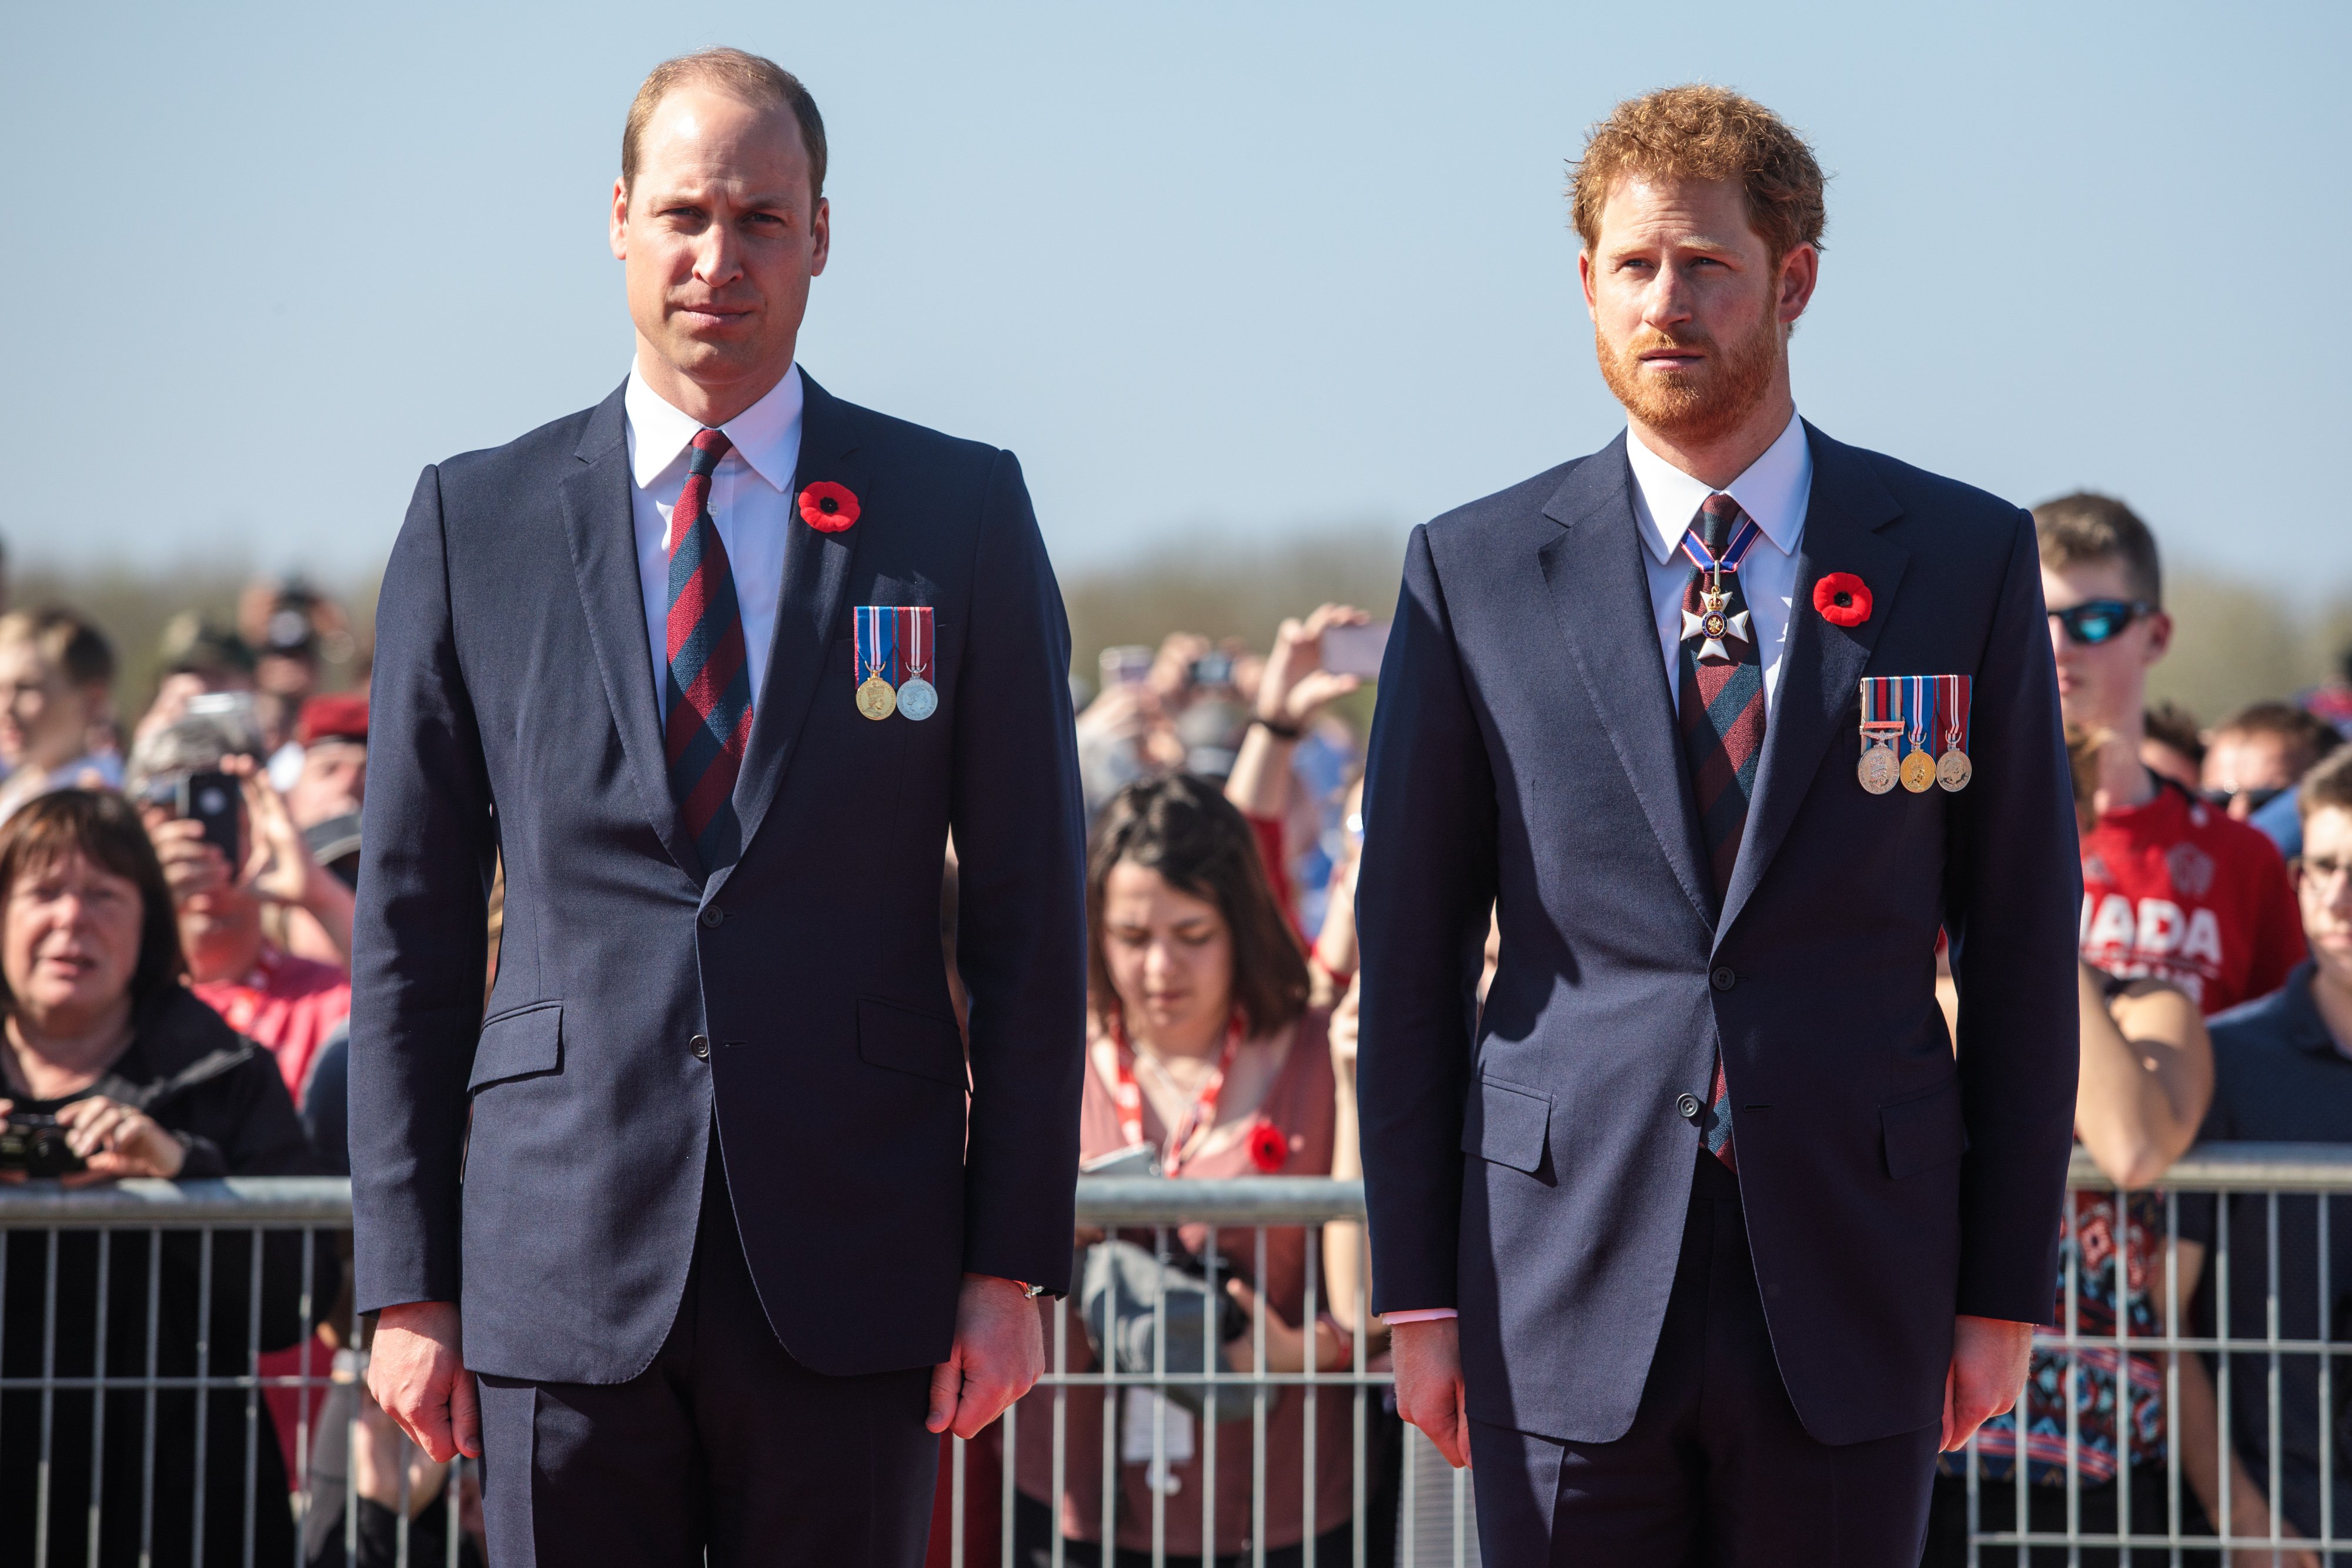 Prince William and Prince Harry arrive at the Canadian National Vimy Memorial on April 9, 2017 in Vimy, France | Source: Getty Images